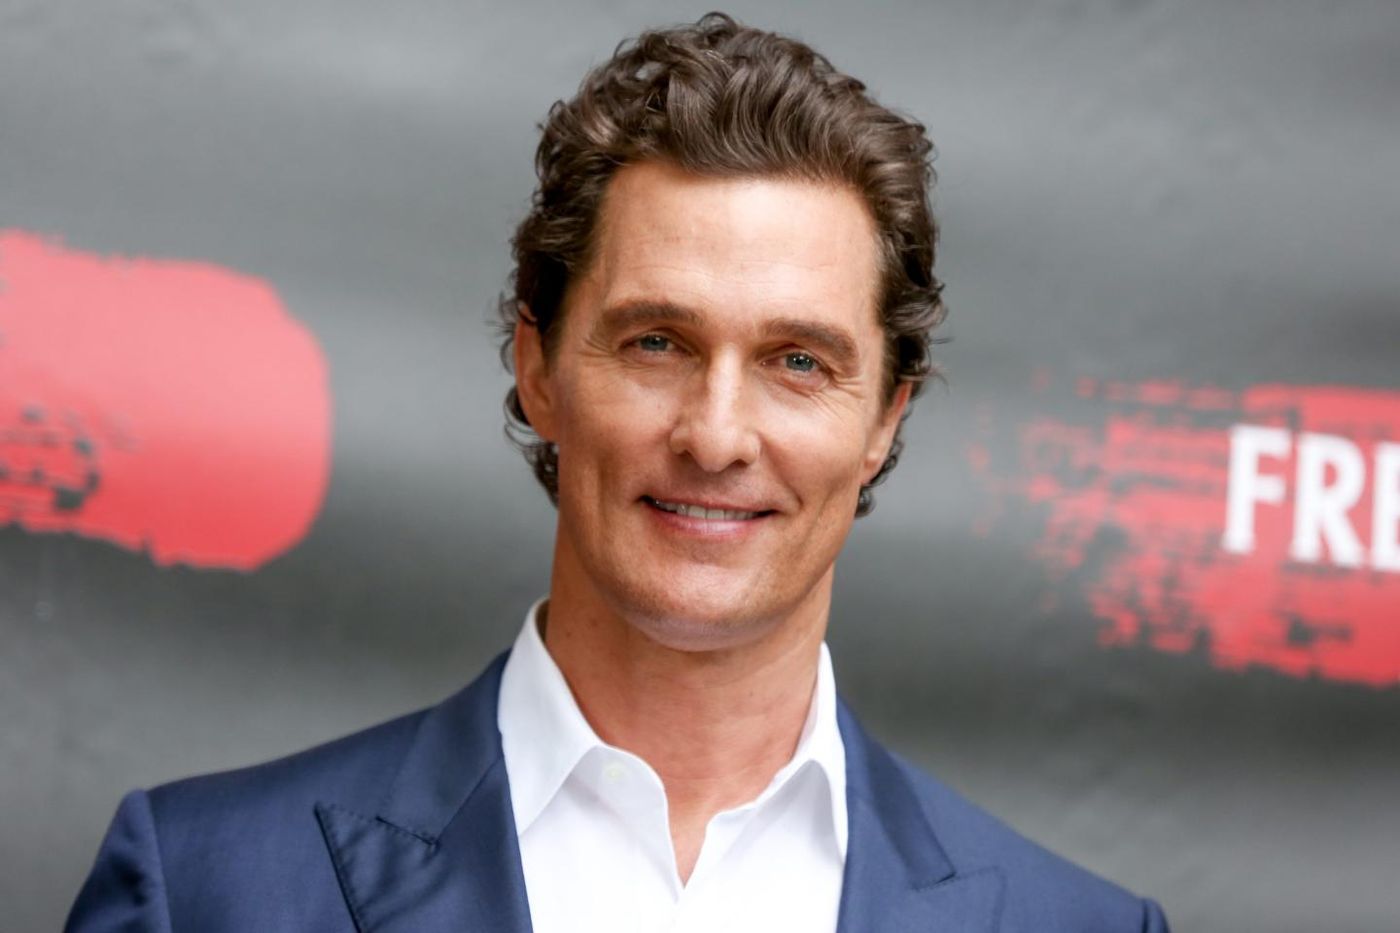 Can You Match These Actors With Their Starring Roles? Matthew McConaughey